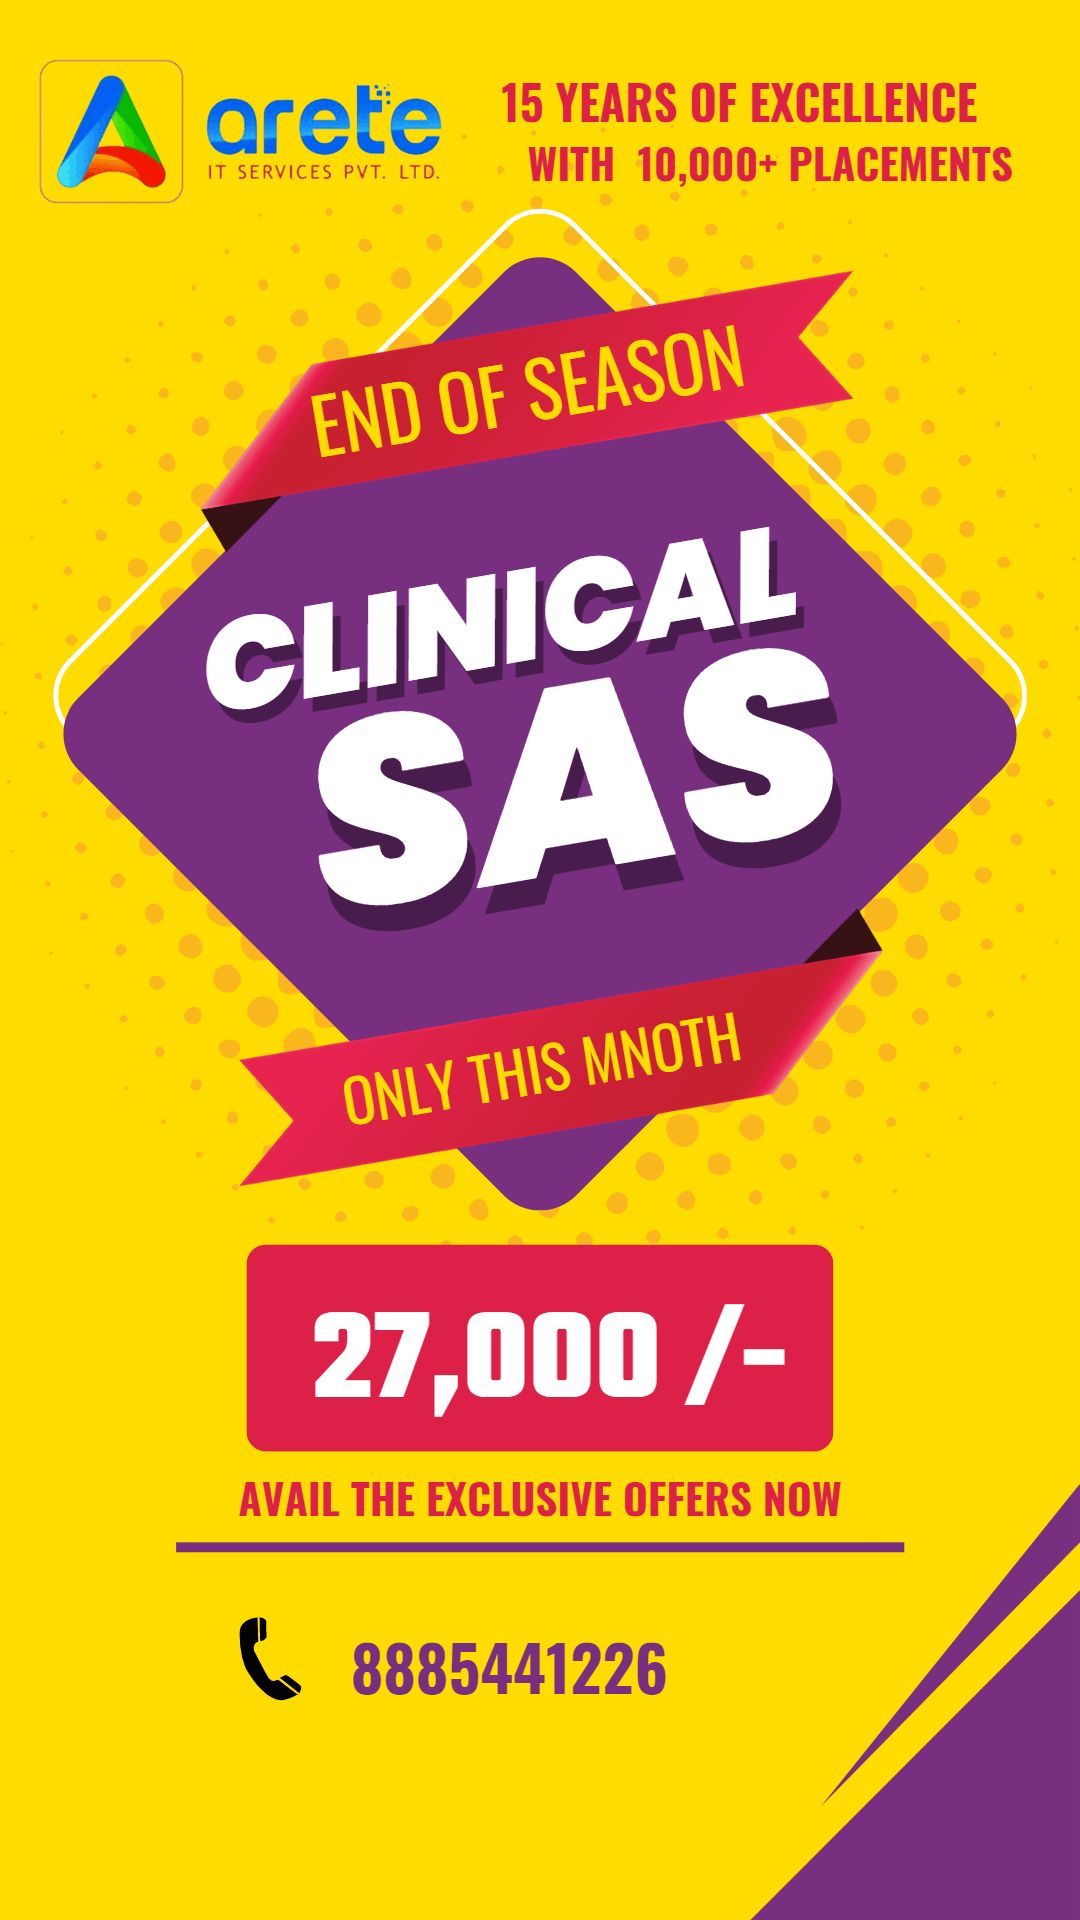 CLINICAL SAS TRAINING, INTERNSHIP AND PLACEMENTS